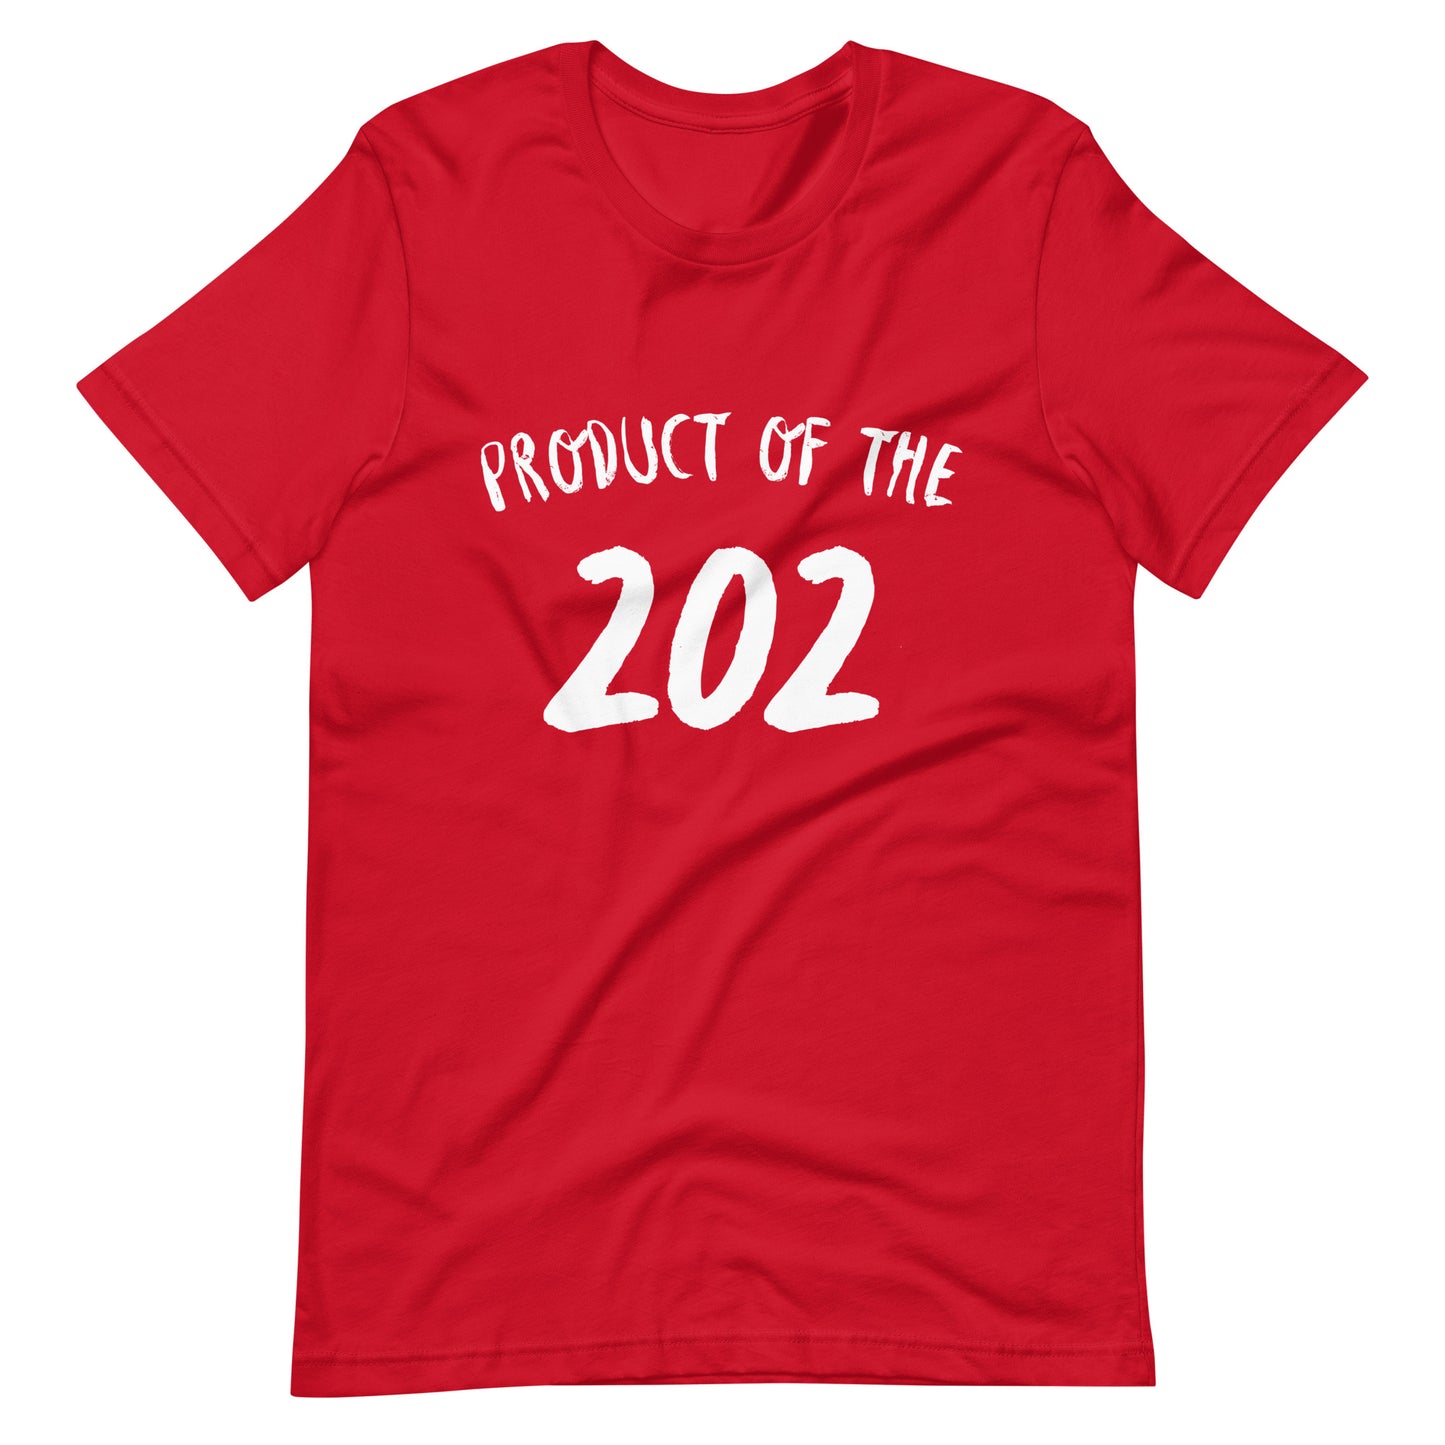 Product of the "202" Unisex t-shirt